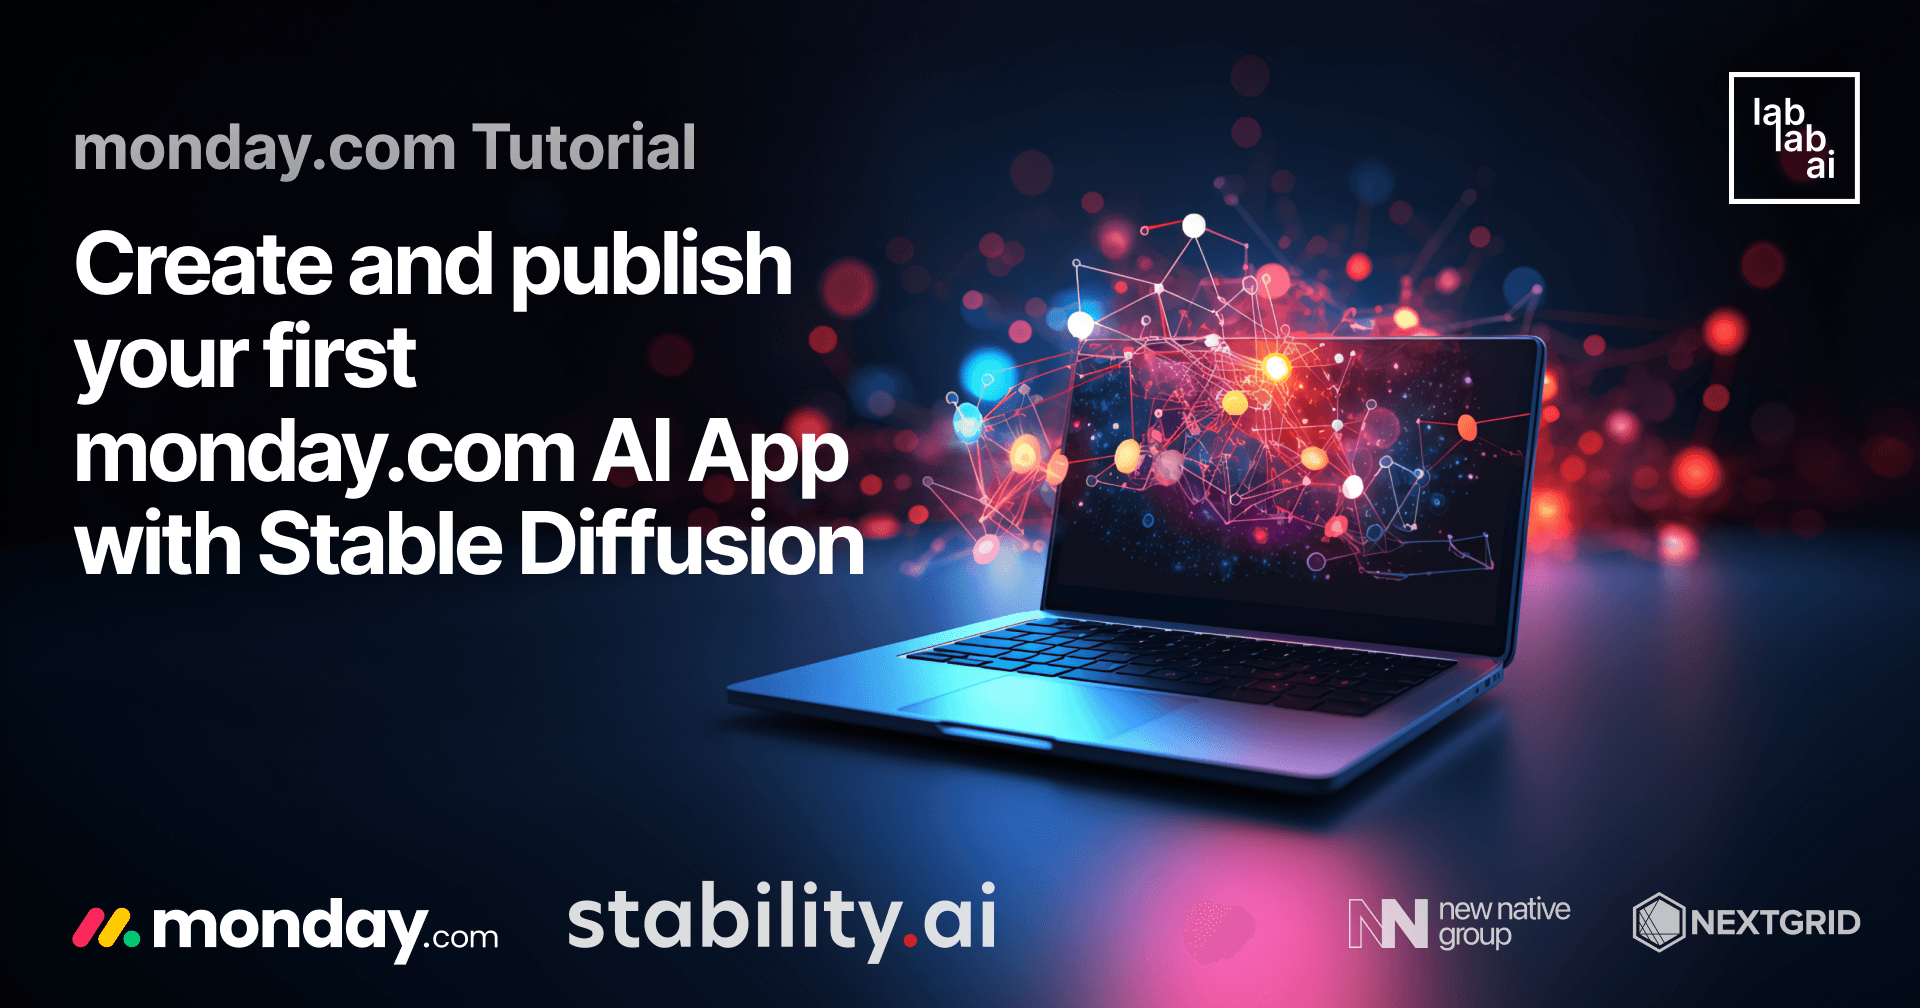 monday.com Tutorial: Create and publish your first monday.com AI App with Stable Diffusion